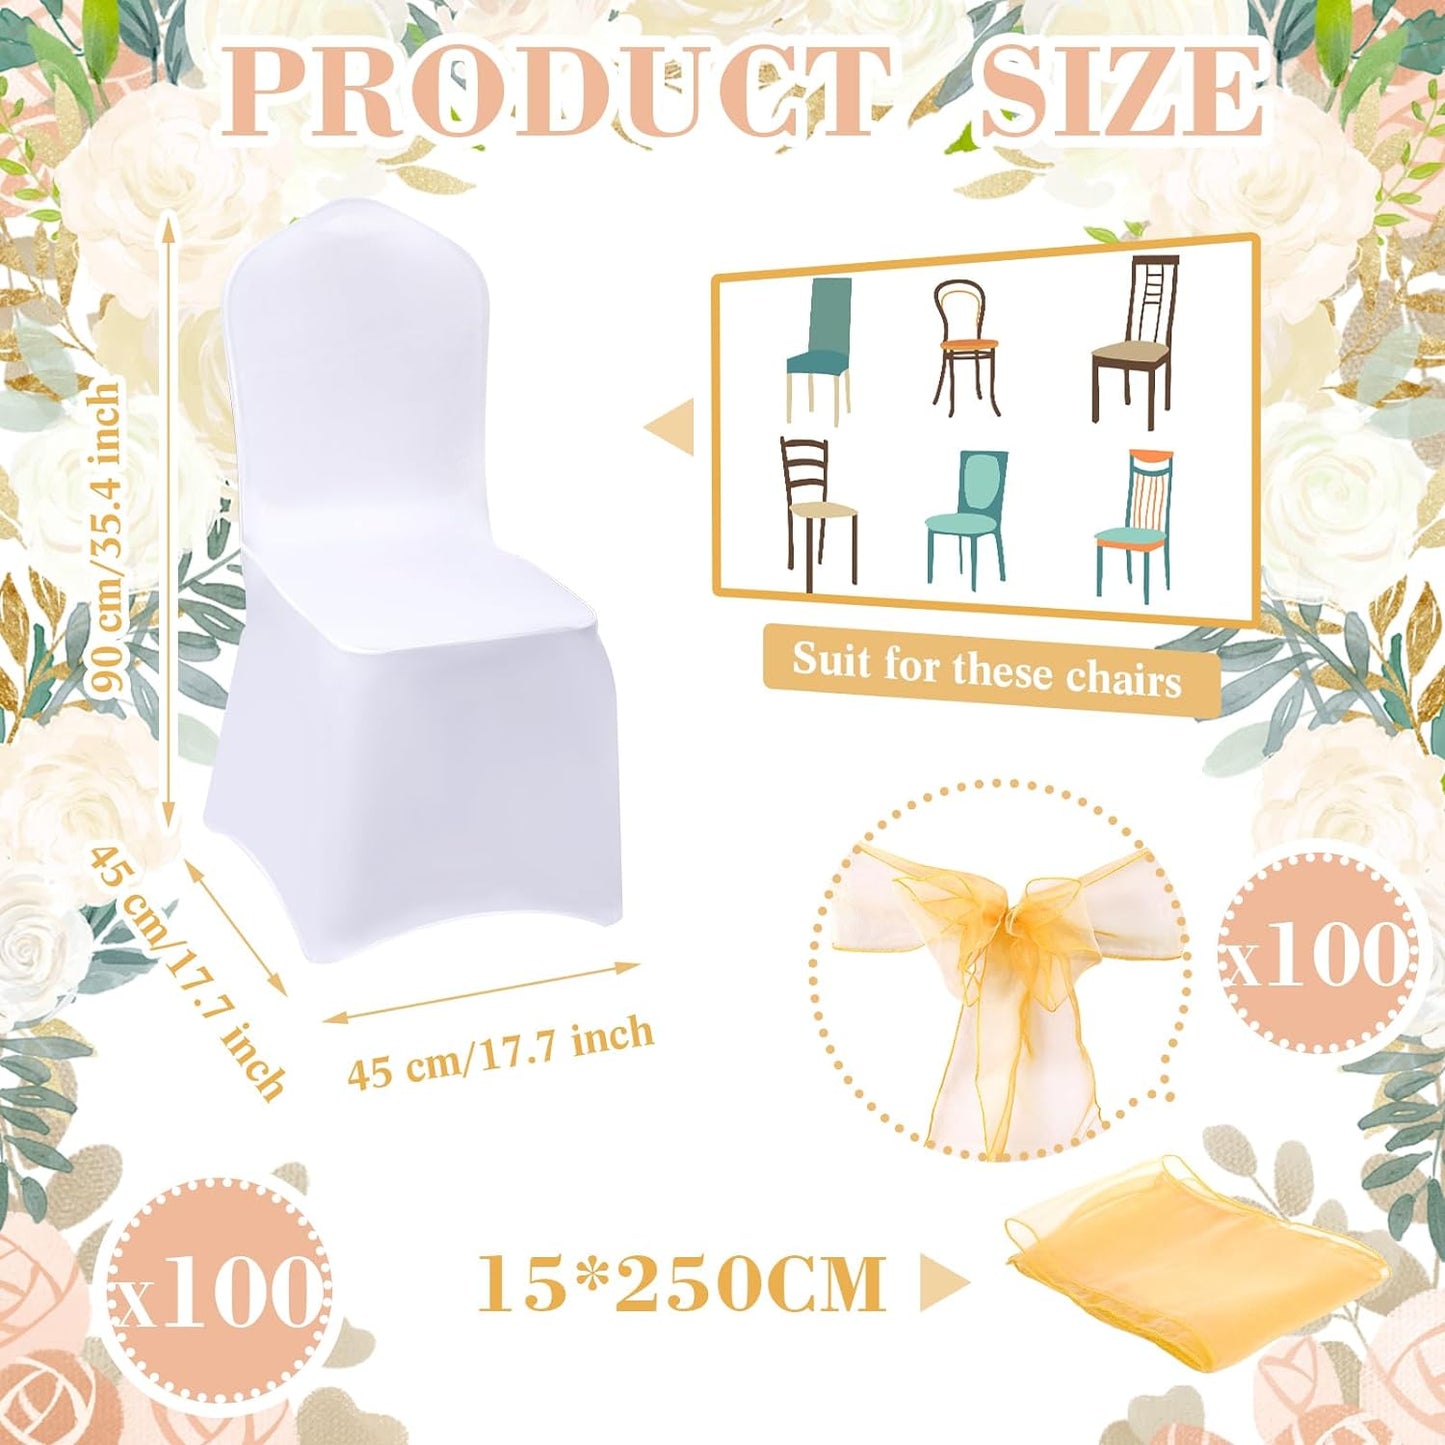 Peryiter 200 Pcs White Chair Covers Set Include 100 Stretch Spandex White Chair Covers and 100 Chair Bows Yellow Sashes f